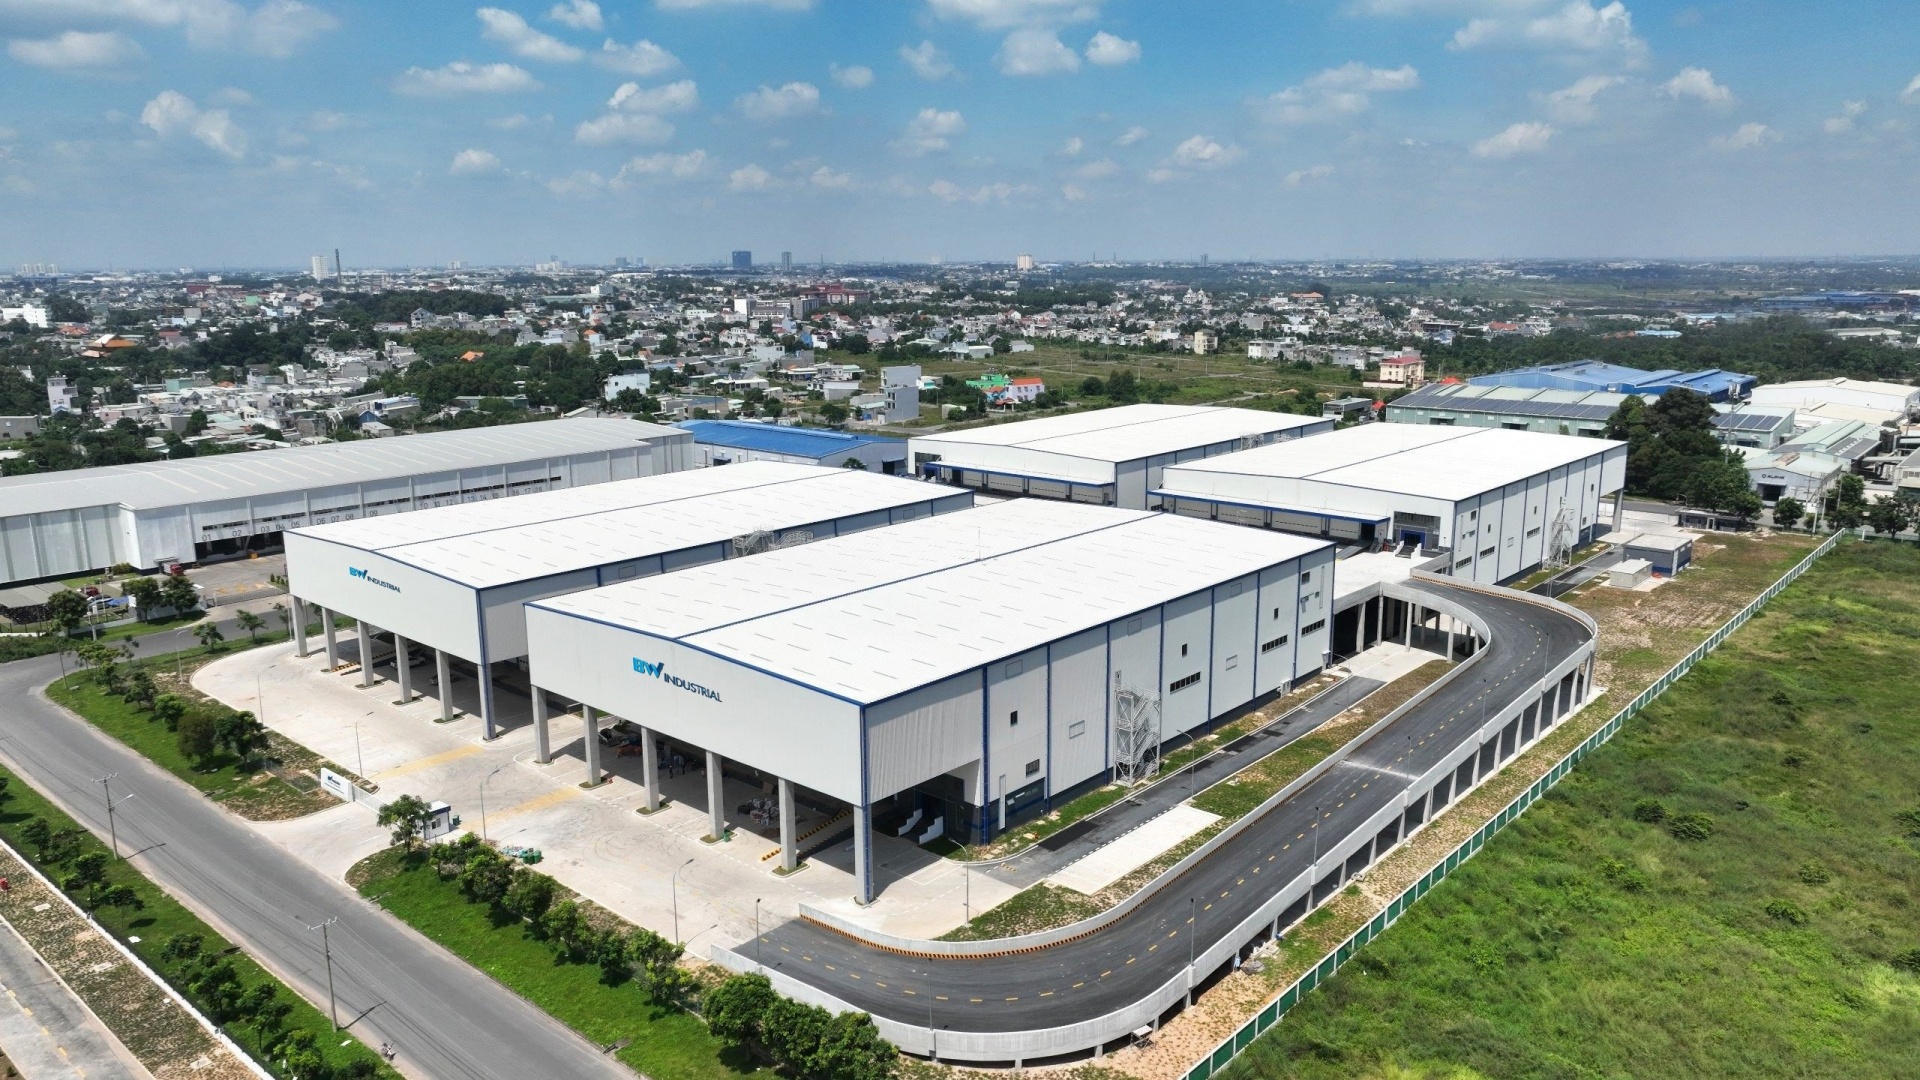 Multi-story storage facilities gain traction in Vietnam